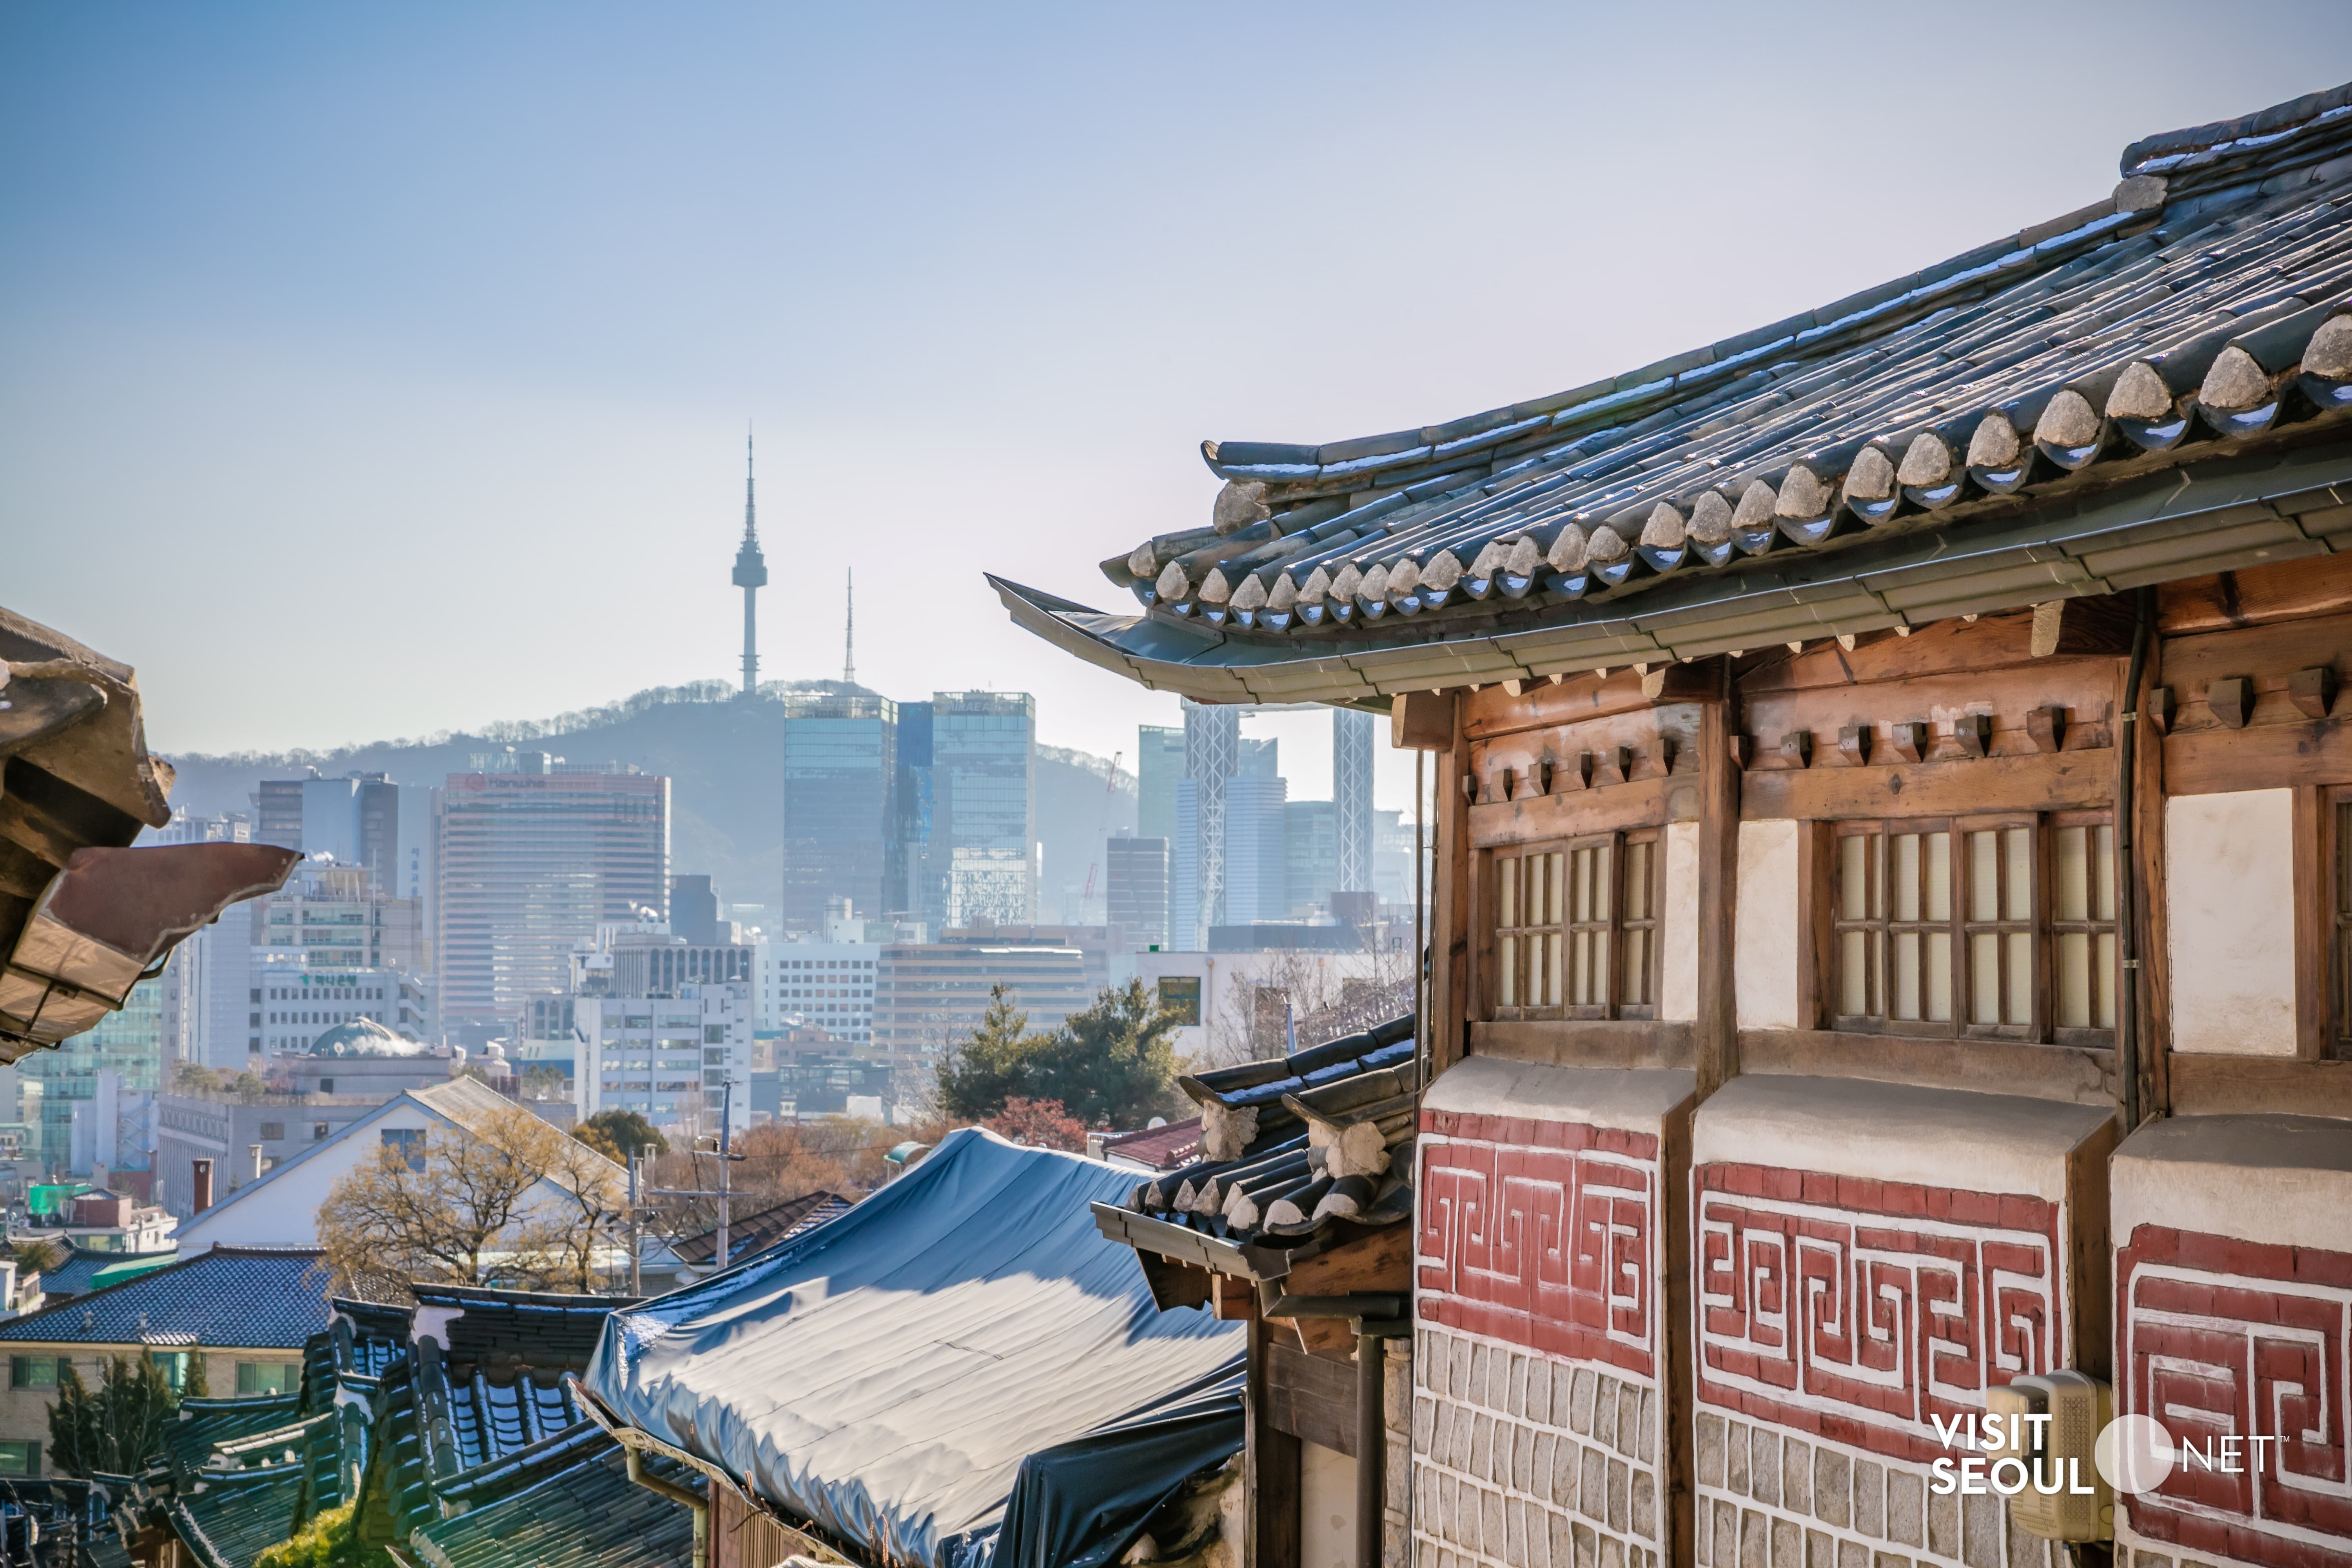 Bukchon Hanok Village5 : View of the village with Namsan Seoul Tower at the back